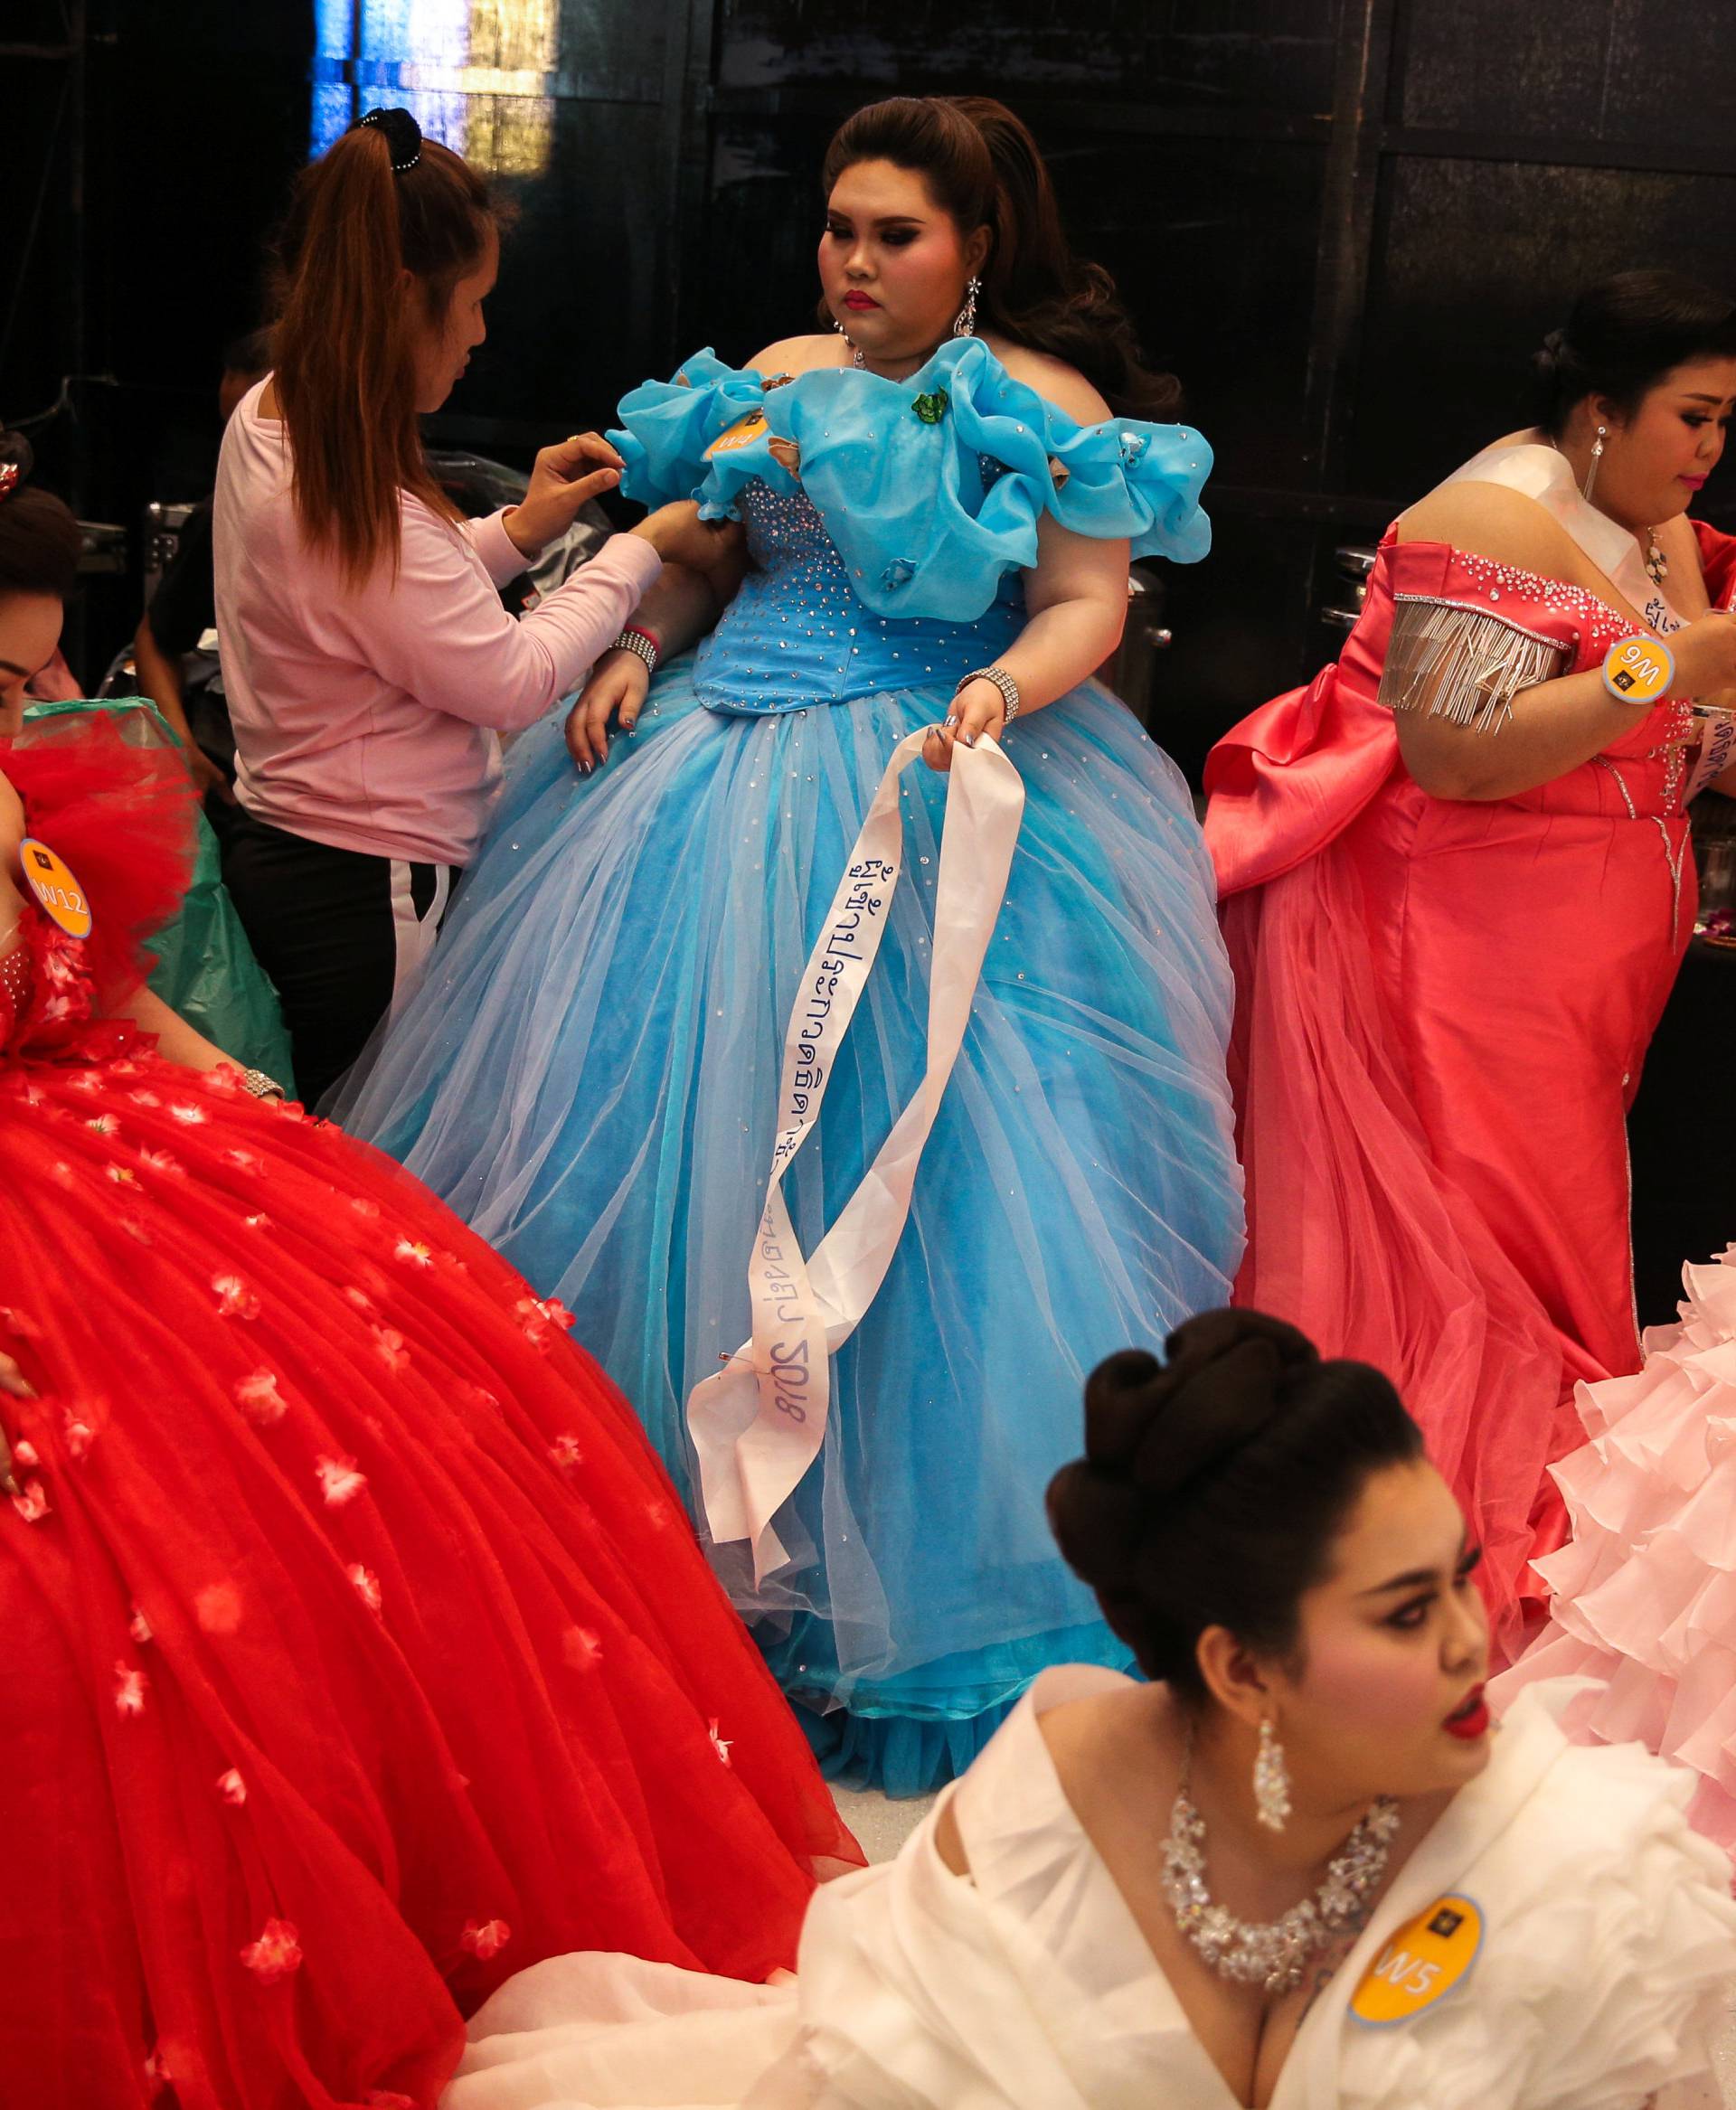 Participants prepare backstage before the final show of the Miss Jumbo 2018 at a department store in Nakhon Ratchasima